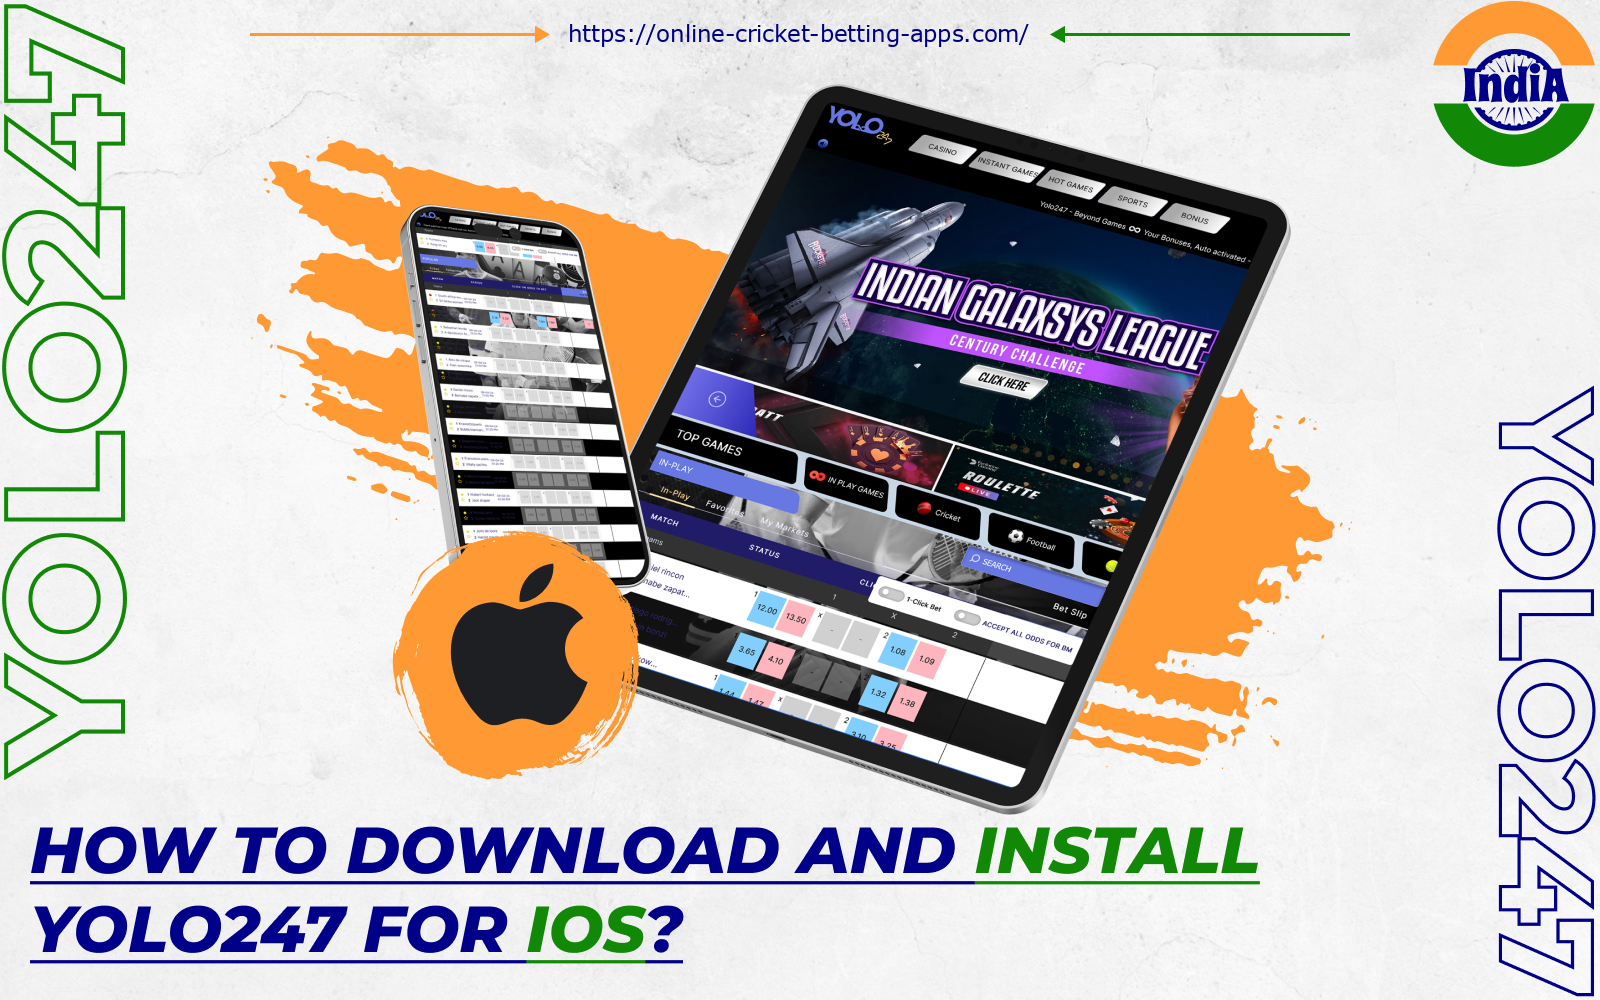 After downloading and installing the Yolo247 mobile app on iOS, players from India will have access to all the features and functions of the casino